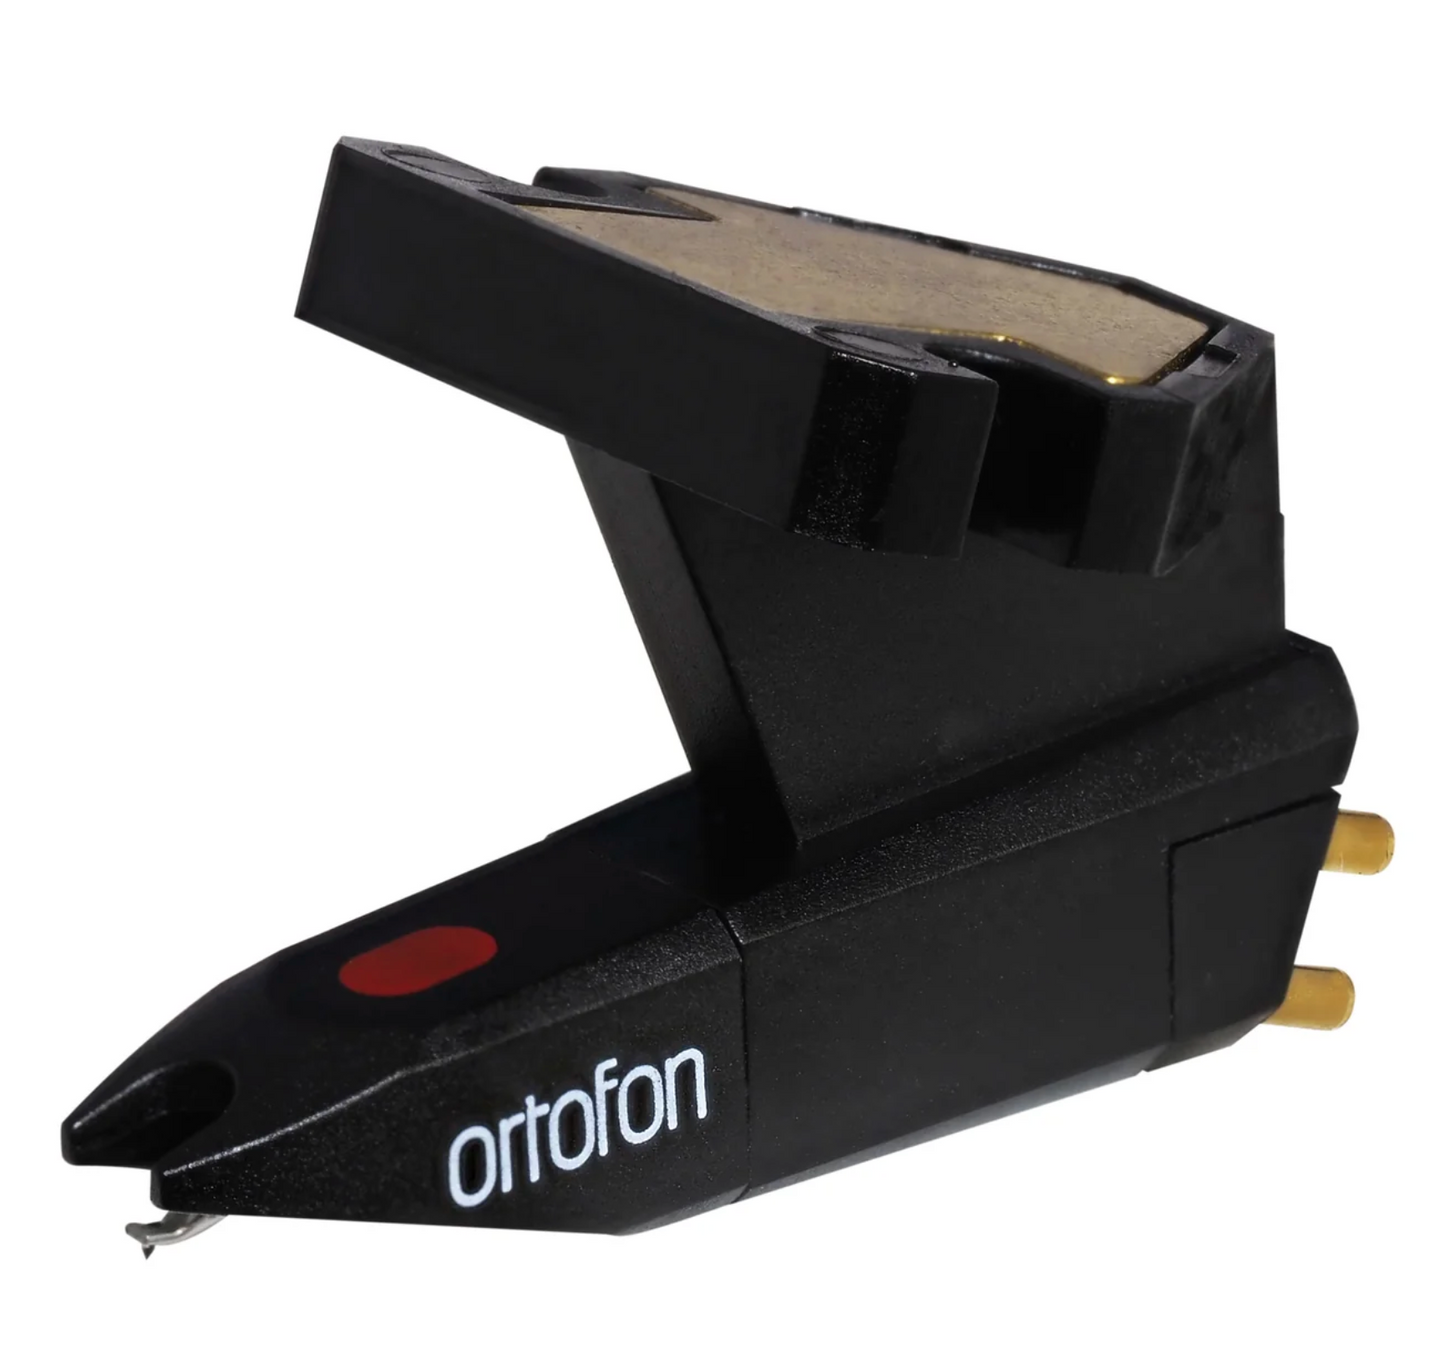 Ortofon Super OM 5E Moving Magnet Cartridge Image showing stylus and right side